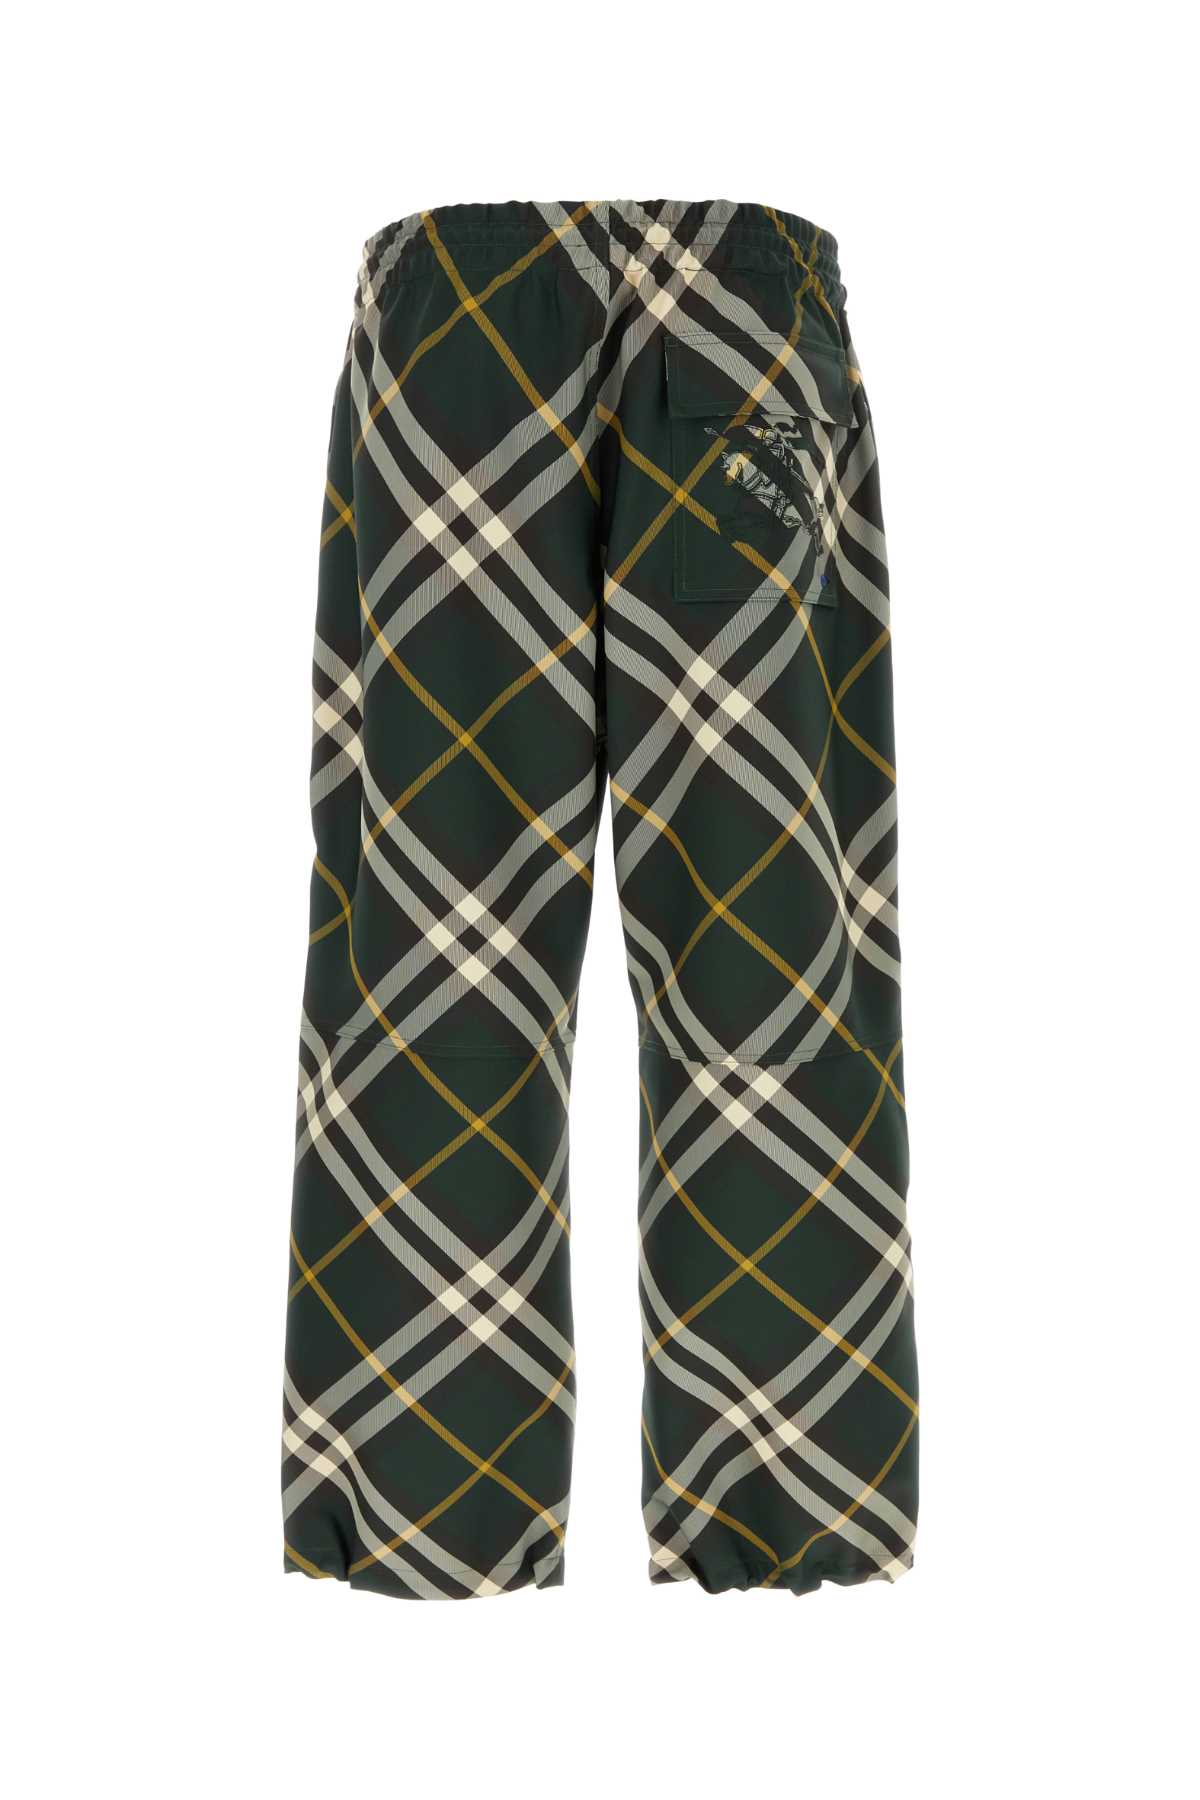 Burberry Embroidered Polyester Pant In Ivyipcheck